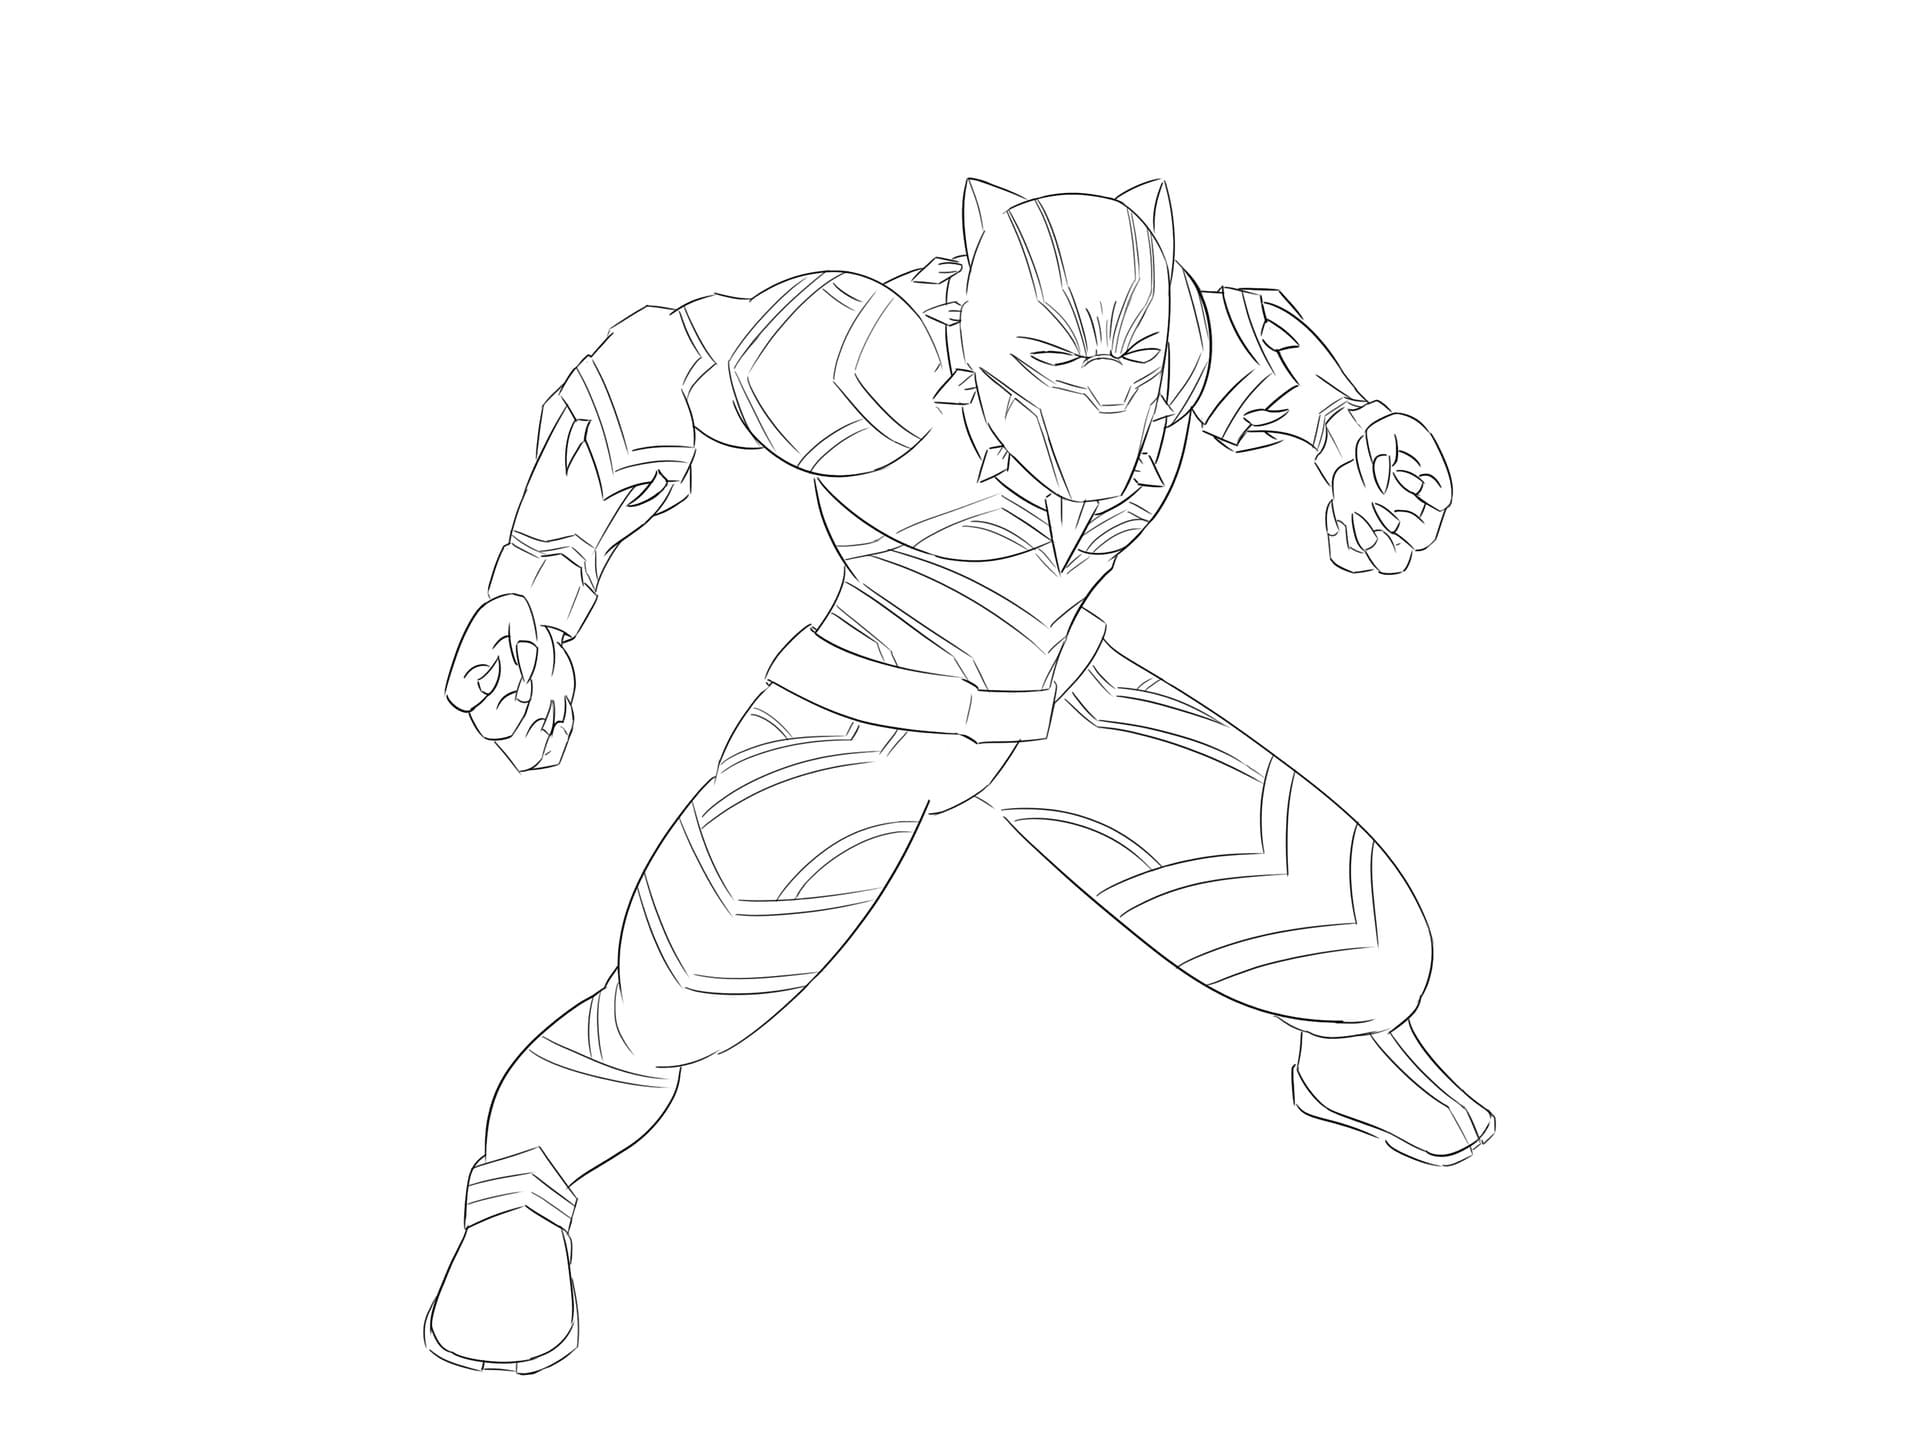 Coloring pages Black Panther. Superhero Marvel Free